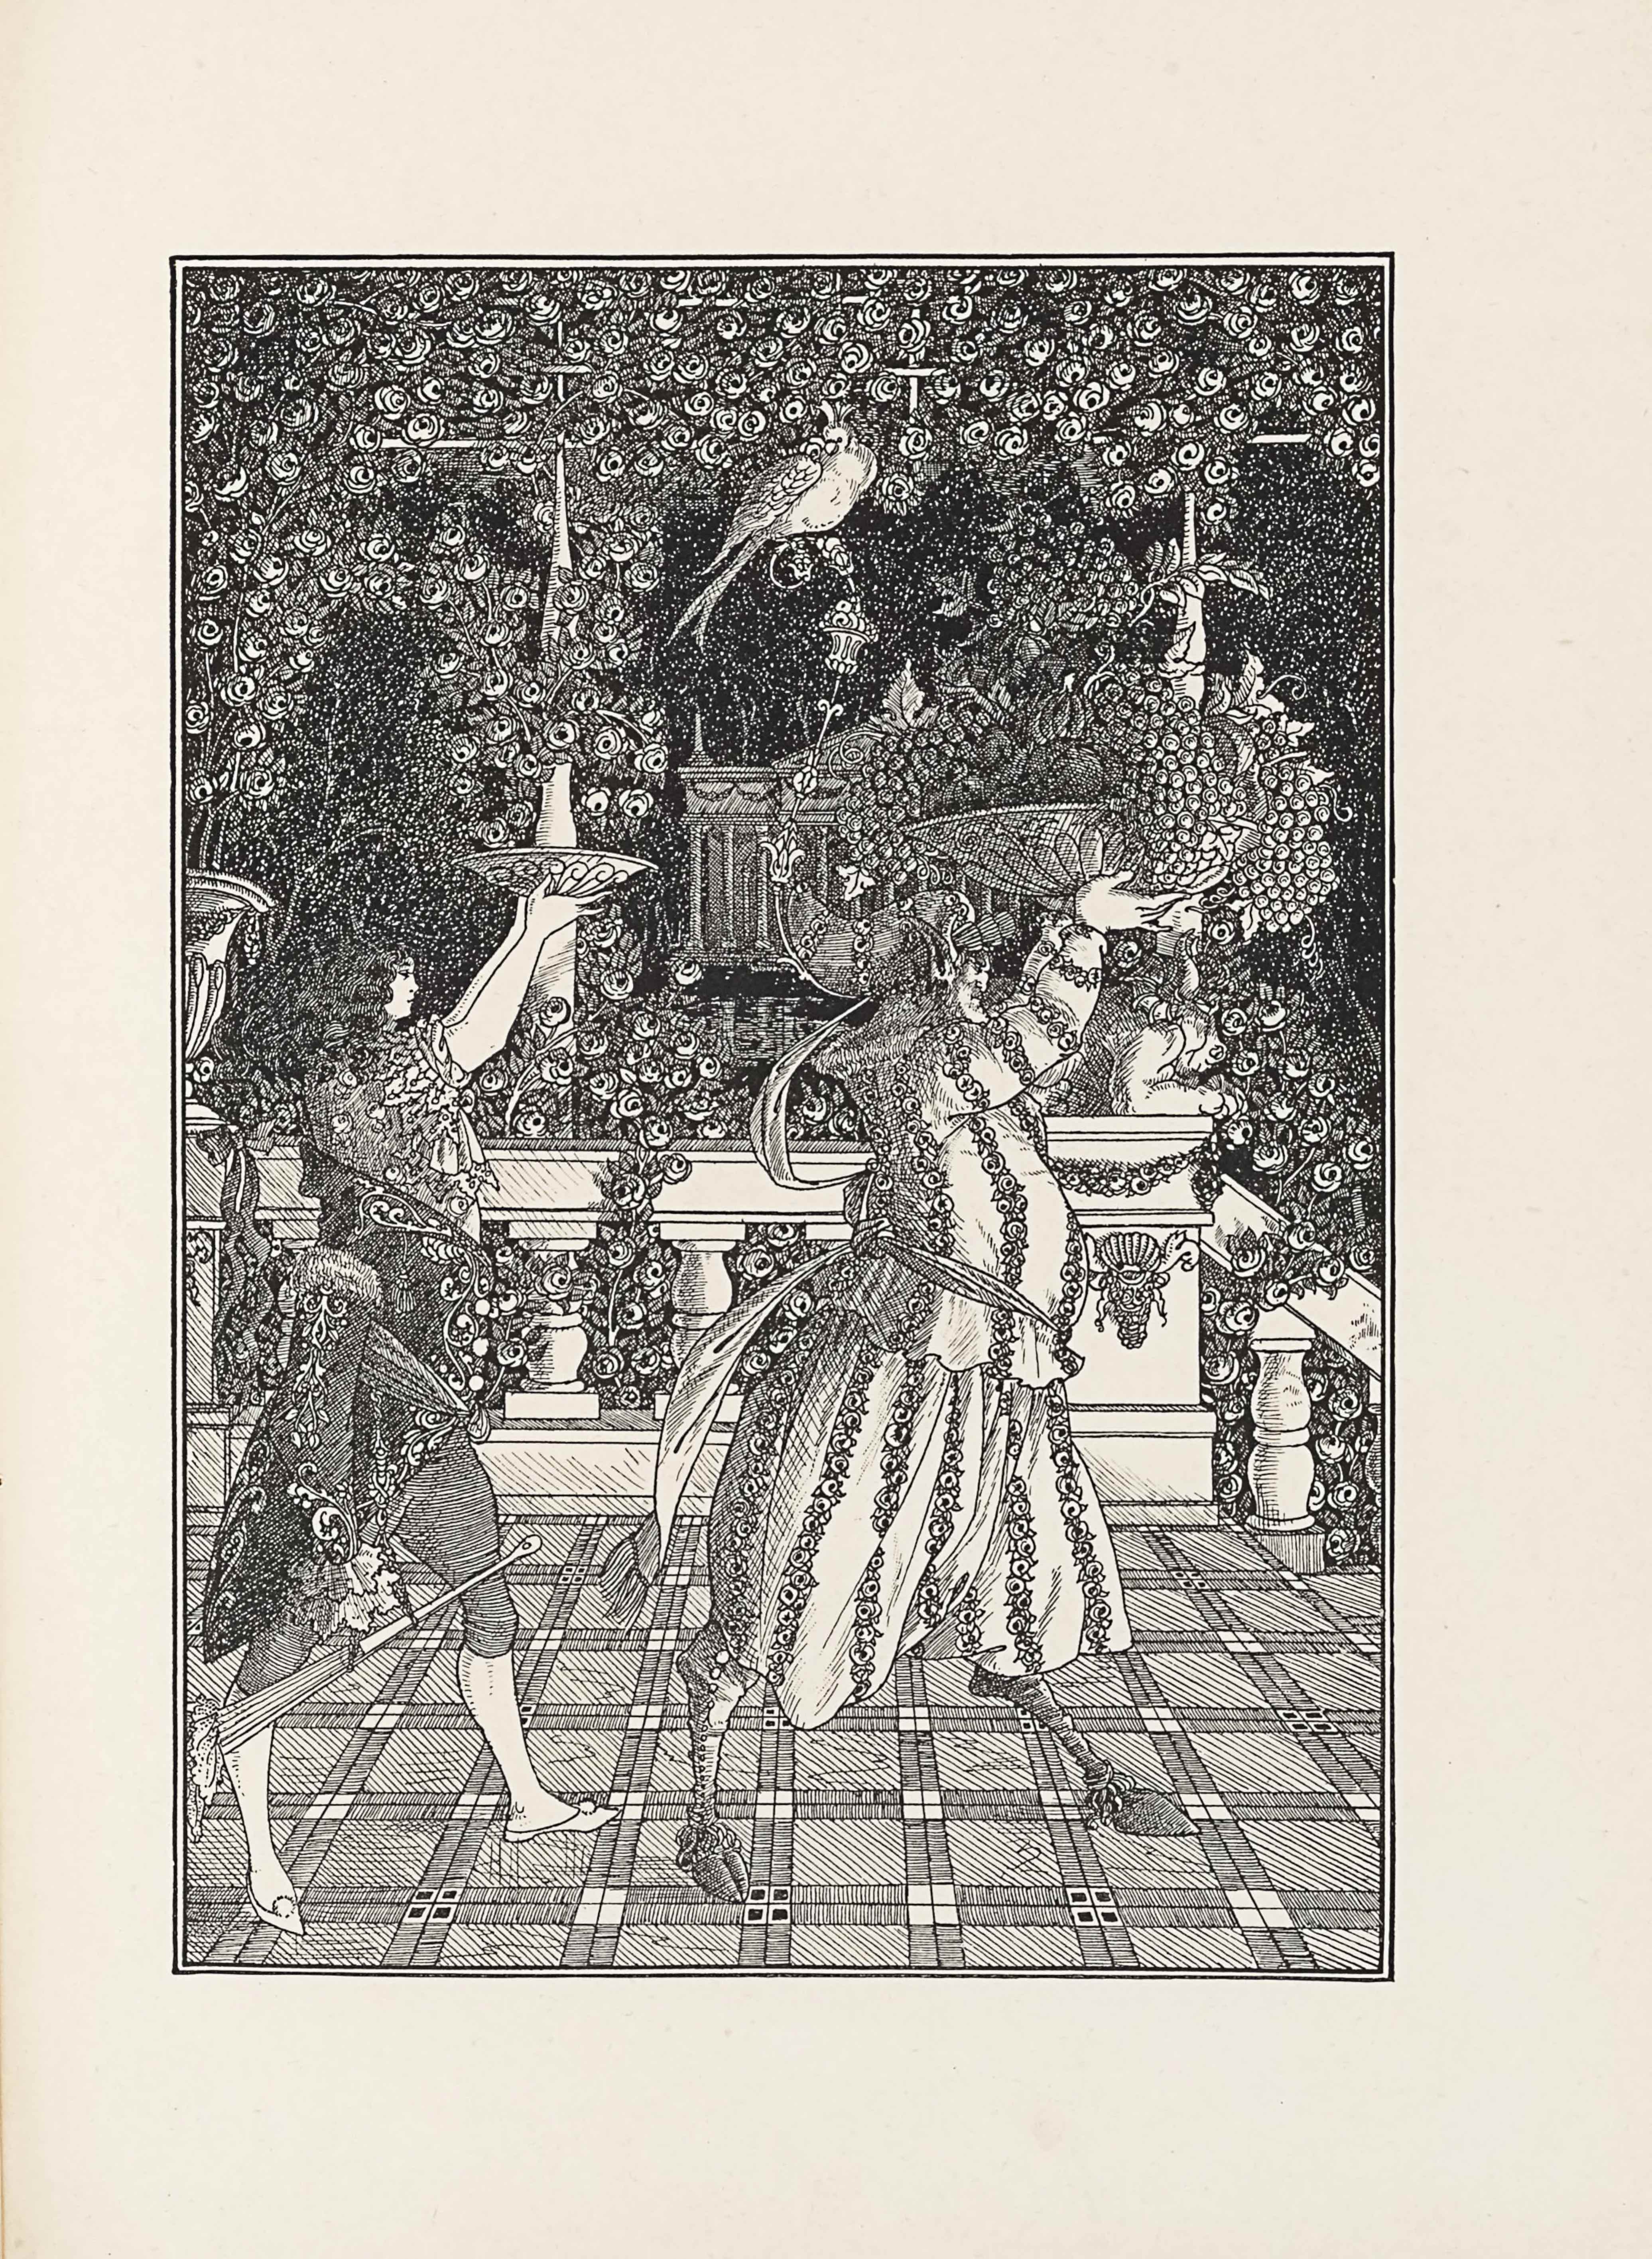 This line-block reproduction of a pen-and-ink drawing is in portrait orientation. It shows two figures walking on a balcony outdoors towards the right side of the page and holding bowls above their heads. In the foreground the two figures stand and reach the halfway point of the page in height. The figure on the left is a woman, turned to face the right, showing only the profile of her face and body. She is wearing slippers with a fabric ball on the toe. She has on short pants striped horizontally which stop just below her knee. She is also wearing a short sleeve shirt and the sleeves are capped off at the edge with braided fabric. There is a decorative floral design on her top of flower bulbs floating around. At her waist is a shawl made of darker fabric than the rest of her outfit. The shawl has a vine traversing it with embroidered flowers blooming from it. She has a fabric belt that secures the shawl at her hips. From this belt, a chain hangs down and holds a long fan dangling horizontally in the air. Her hair falls down to her mid-back in dark waves. Her arms are raised above and in front of her in about a ninety degree angle. In her upturned hands is a shallow wave-patterned bowl. To the right of the woman is a figure with a male face and hooves who is similarly turned to the right and visible in profile. He has horse hooves and horse legs emerging from the bottom of his baggy pants. The pants and his long sleeve shirt are identically patterned with vertical lines of flower garlands. A sash of material is tied around his waist and knotted at his back. He has long and pointy elf-like ears that arch backwards. His nose is downturned and stubby. He has on a pointed bonnet with the similar flower garland pattern to his clothing. From the back of his head a long curved stick points out and upwards. On this stick there are several ornaments that look like flowers stacked one upon the other. Atop the stick a quail is perched. The quail looks down towards the woman. The man’s arms are also at about a ninety degree upwards angle, and he too holds a bowl. His bowl is double the size of the woman’s. It holds huge bunches of fruits such as grapes and berries. A squash is visible in the bowl too. Leaves and vines are mixed into the bowl with the fruits. The woman and male creature are both walking on a large deck surface that is tiled in a checker pattern, with borders around each box. The deck has a stone railing made of two long horizontal slabs with thick stone spindles between them. Towards the left edge of the page the stone railing has a large urn resting on it, but only half in the frame. There is a decorative stone piece on the front of the pillar at the right end of the railing, just to the right of the male figure. It is an insect-like creature with wings and legs. Above the insect stone work, on the top edge of the railing, a beast is shown laying down onto its front paws. The creature is horned and in profile facing the same way as the two figures. The last pillar, which is below the creature, marks off the end of the deck and the transition into stairs leading down. The railing continues downwards at a diagonal to the right edge of the page. Behind the deck and railing is a garden area. A tall garden arbor stands behind the rail and many vines with flowers grow up and around it. Behind the arbor in the background is a small pond and further backgrounded still is a large columned building with a pointed roof. A dark forest surrounds the building in the background.